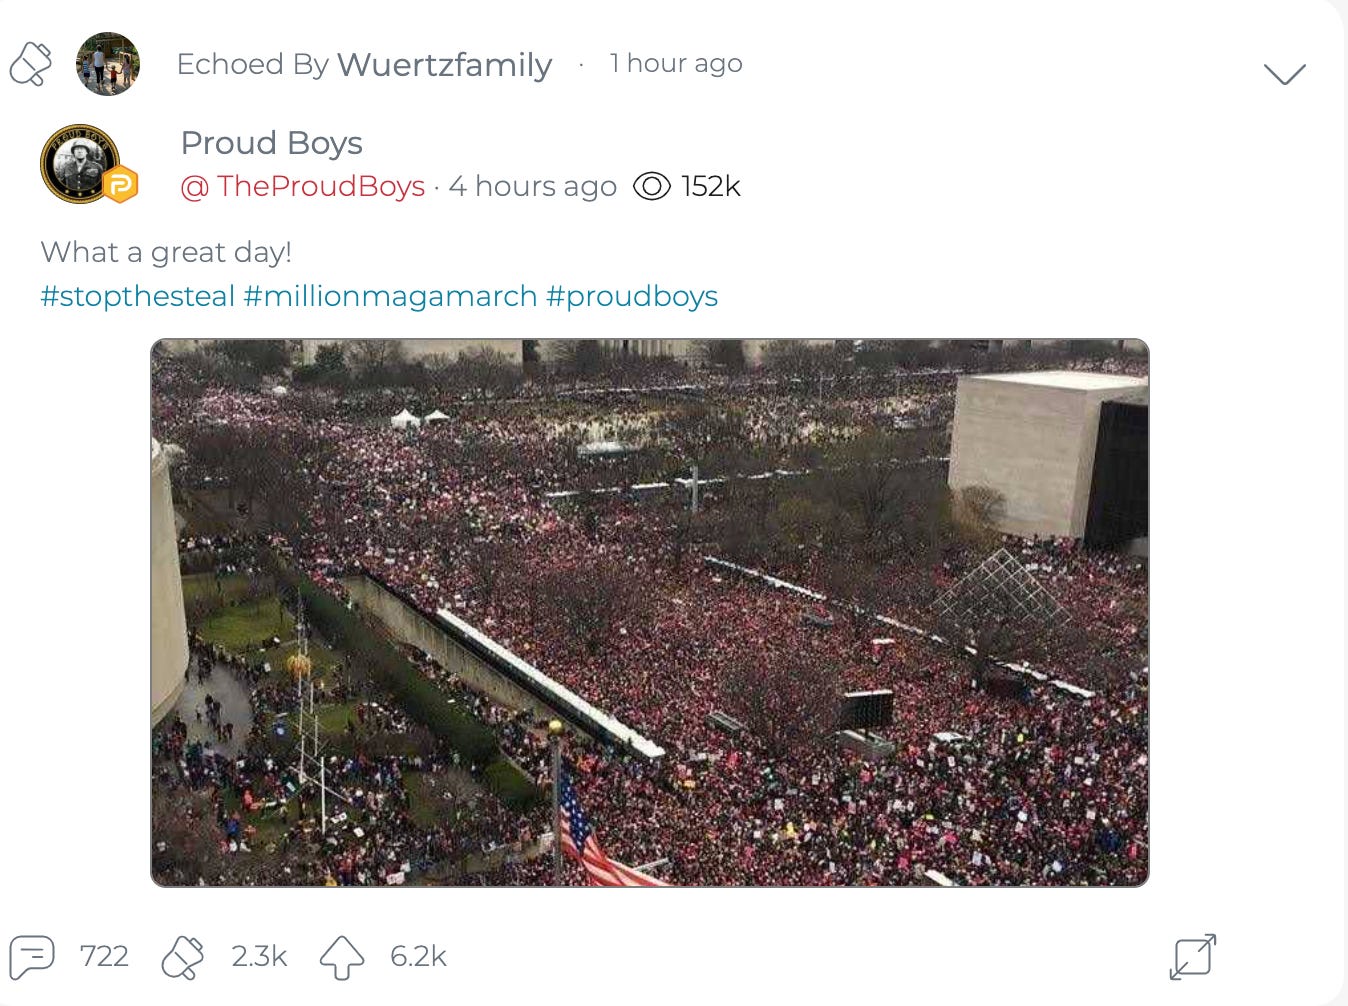 @WuertzFamily shares a post from The Proud Boys’ official Parler account celebrating the “Million MAGA March.” (Image: Parler screenshot.)